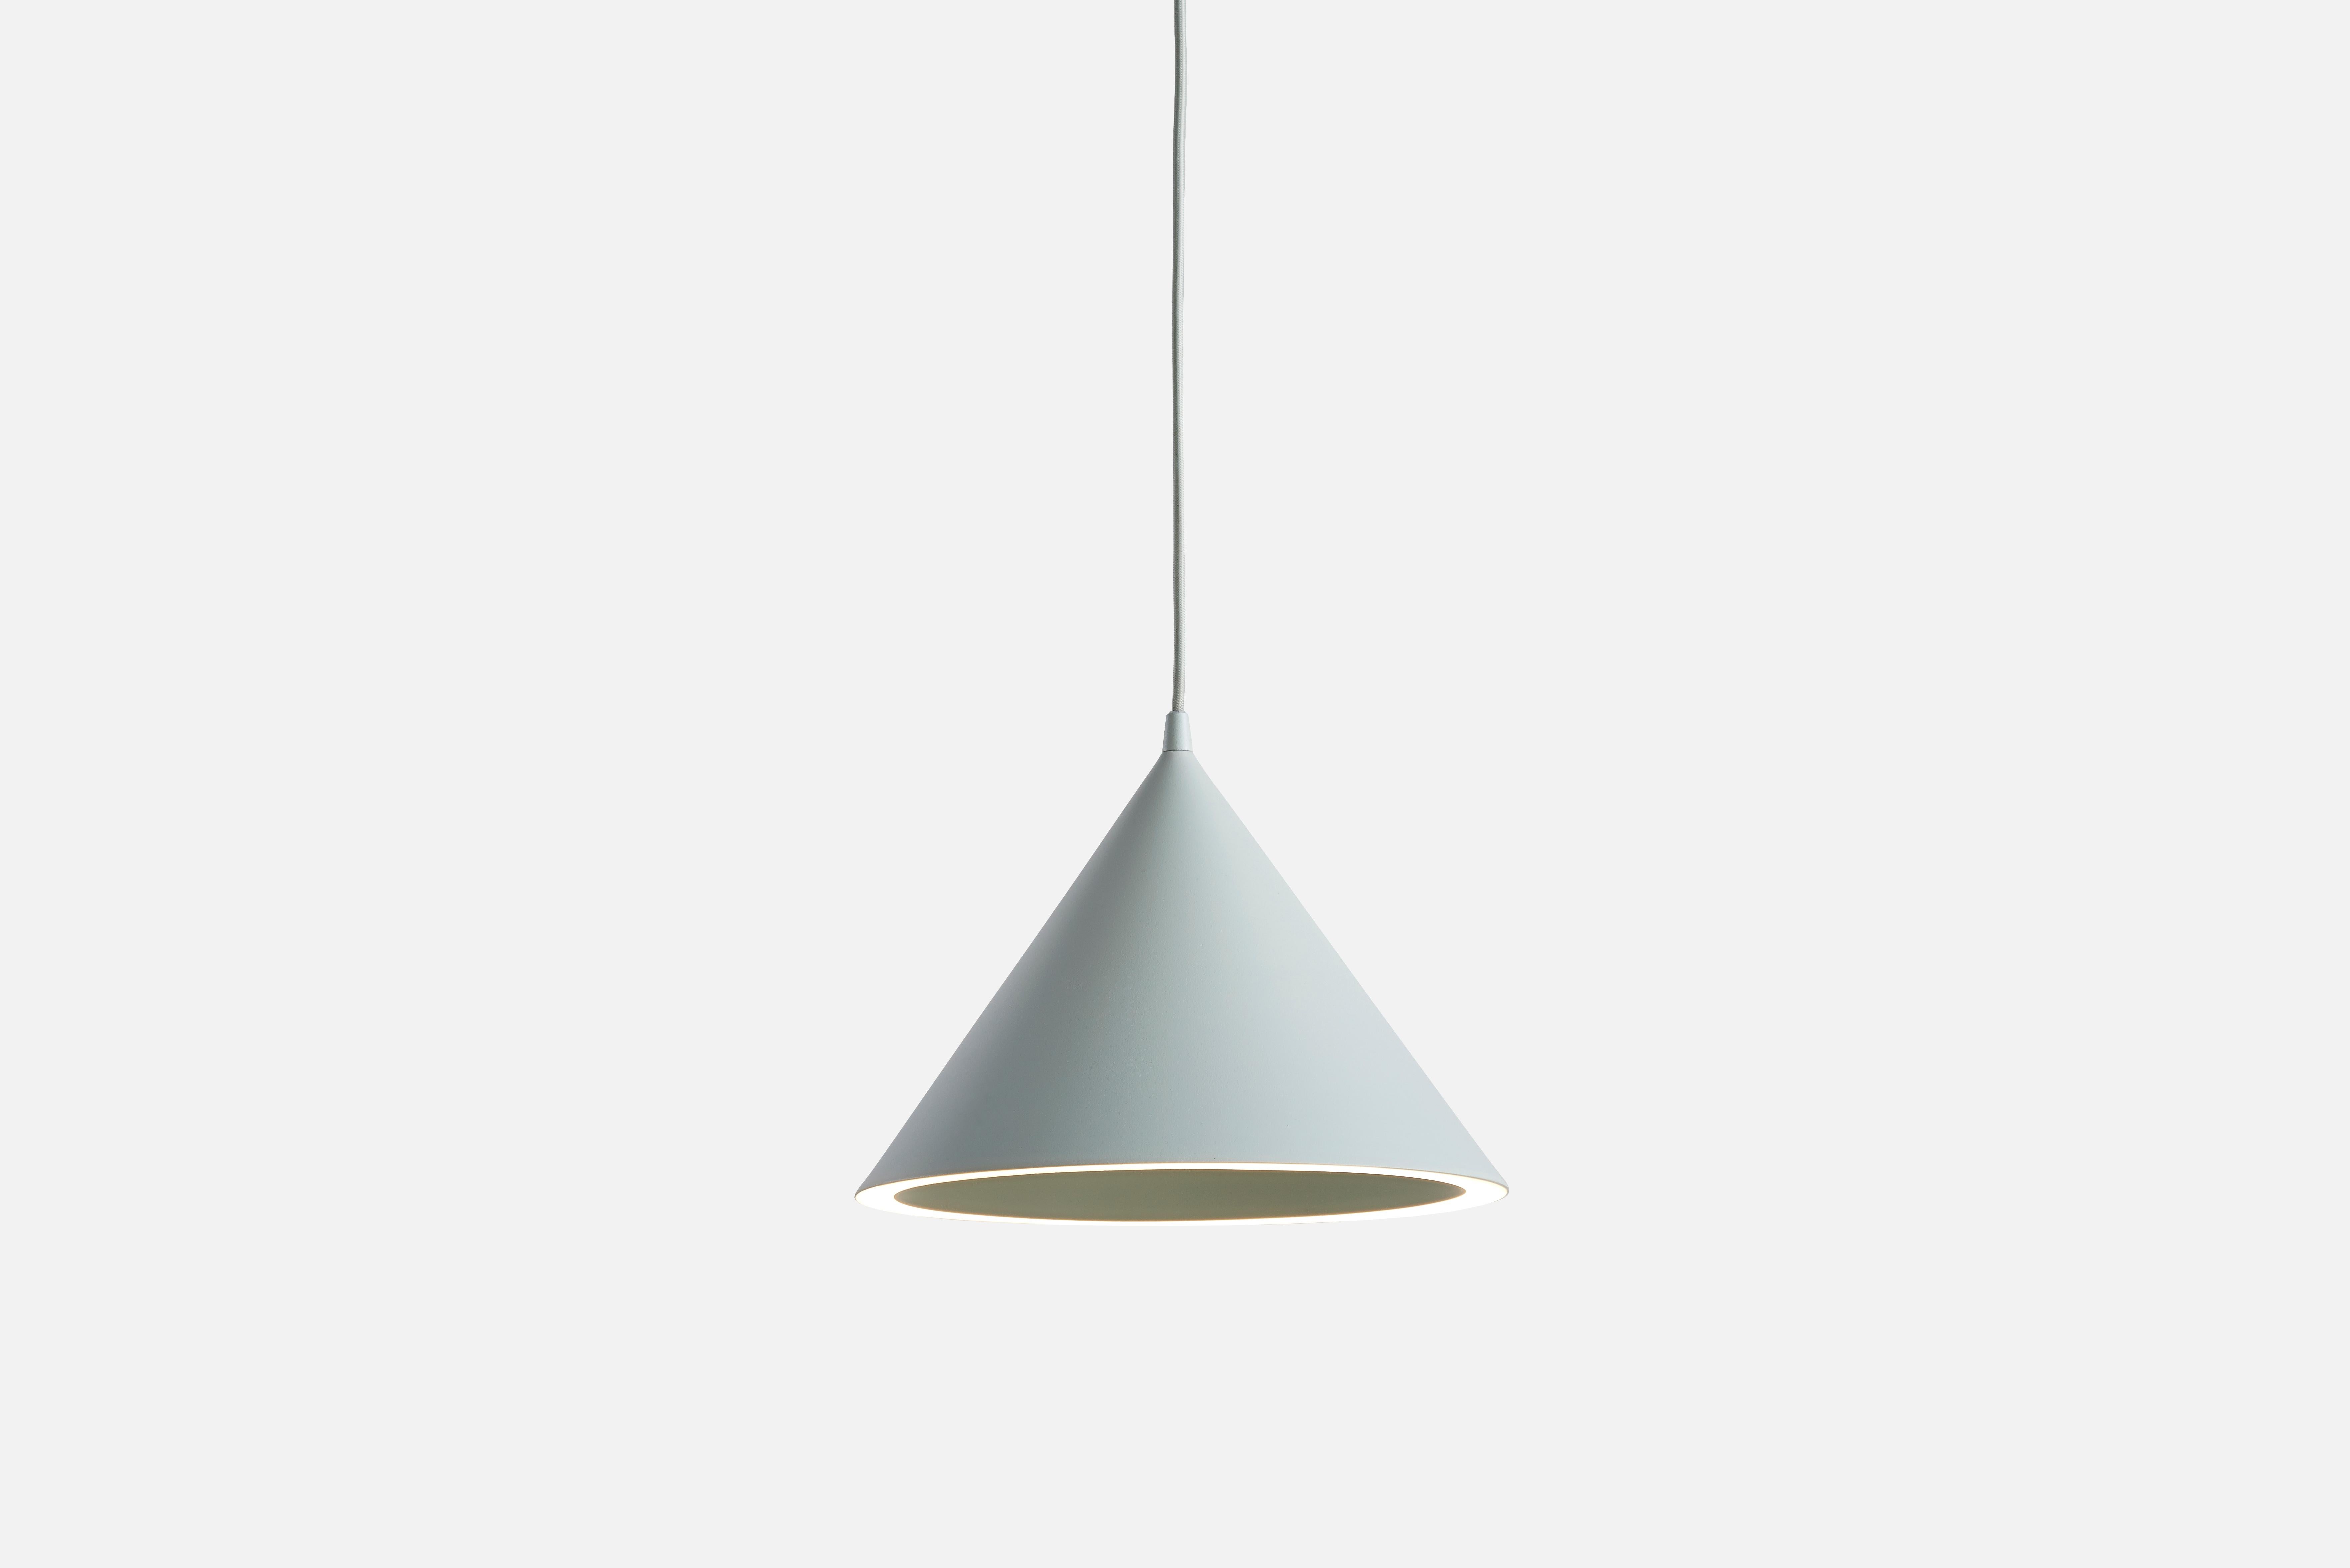 Small mint annular pendant lamp by MSDS Studio
Materials: Aluminum.
Dimensions: D 32 x H 23.8 cm
Available in white, nude, mint, black.

MSDS Studio is a successful Canadian design studio that works in interior, furniture and lighting design.